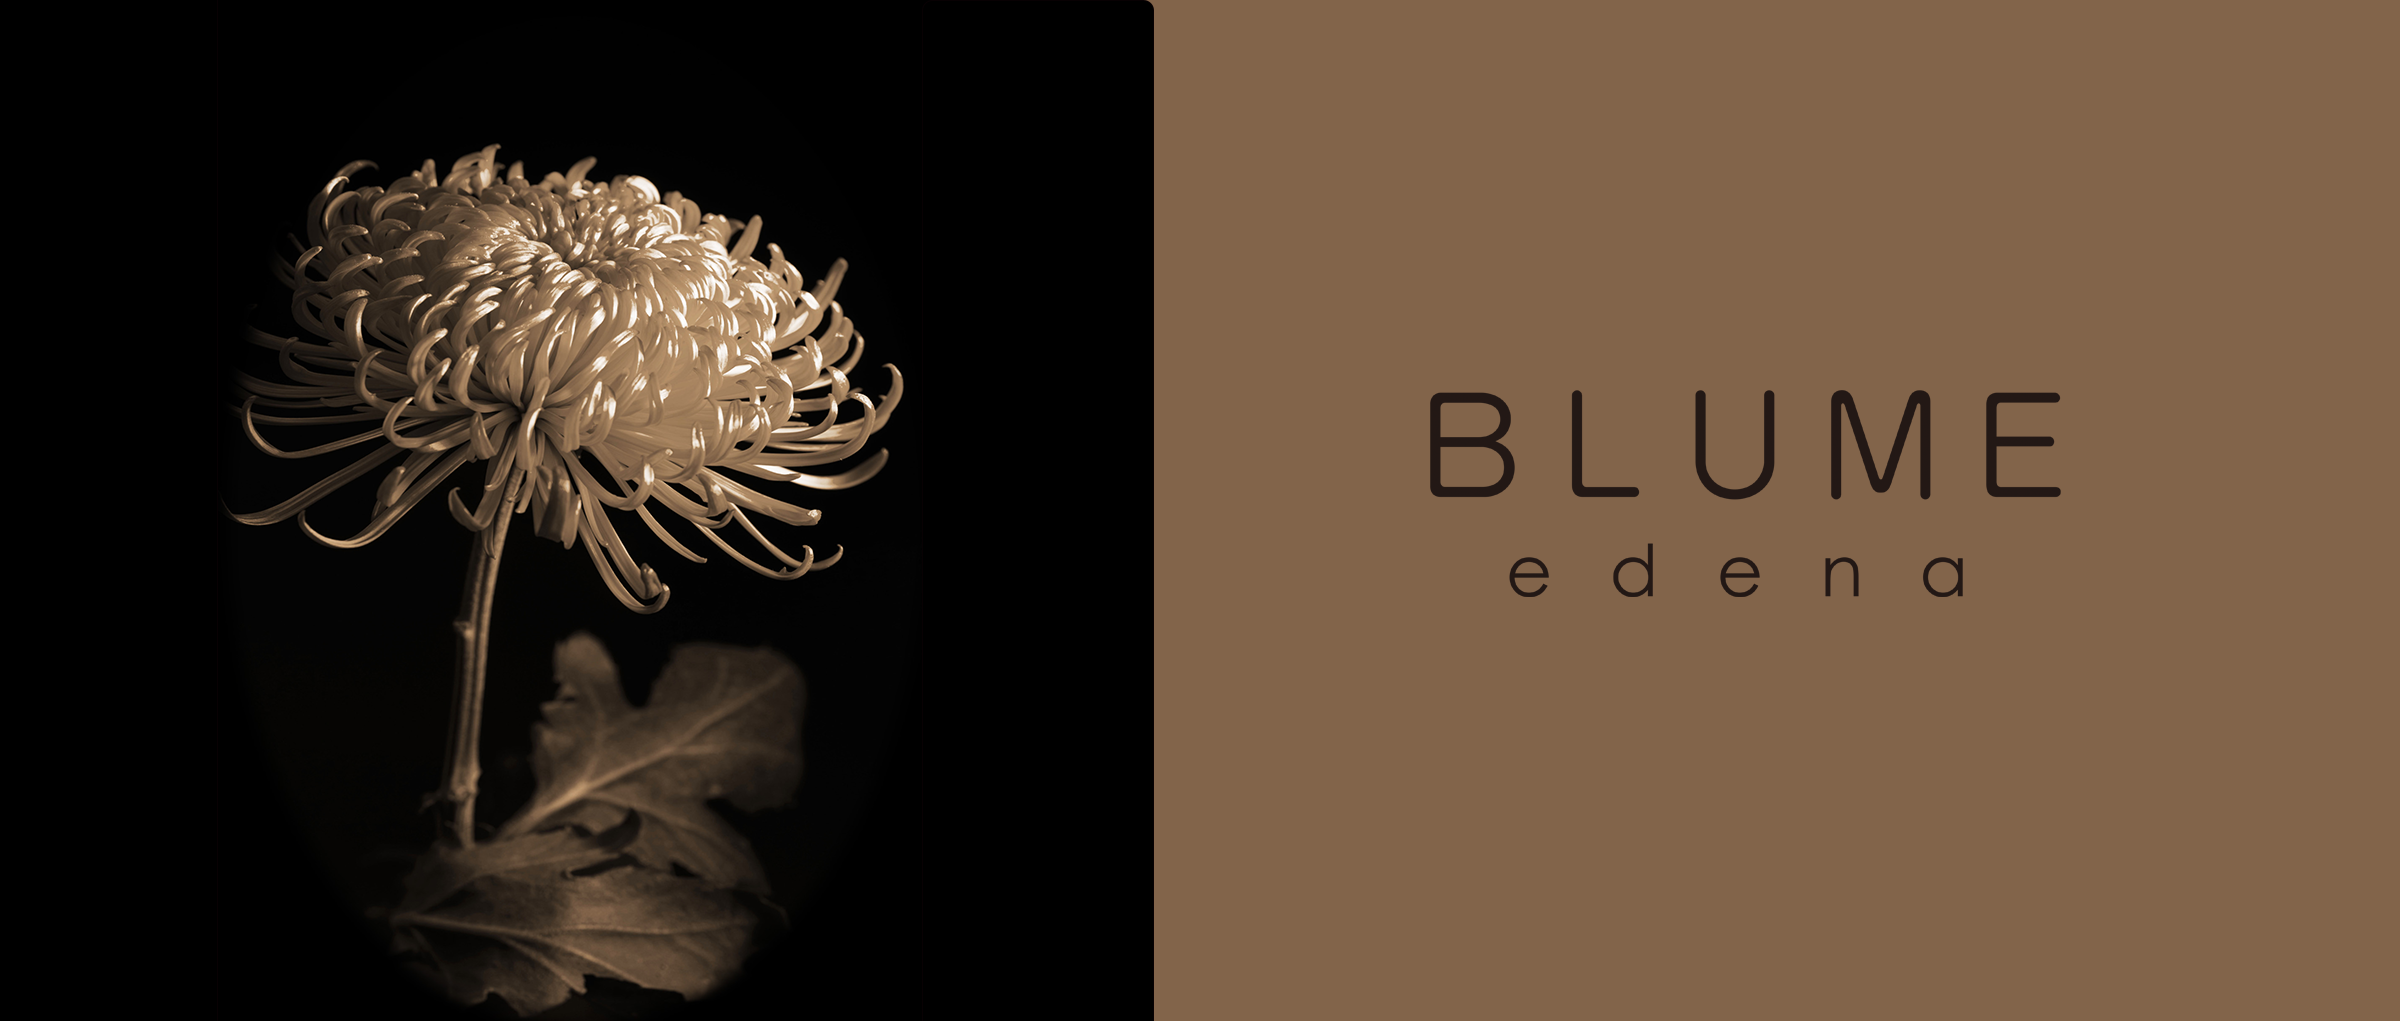 about BLUME